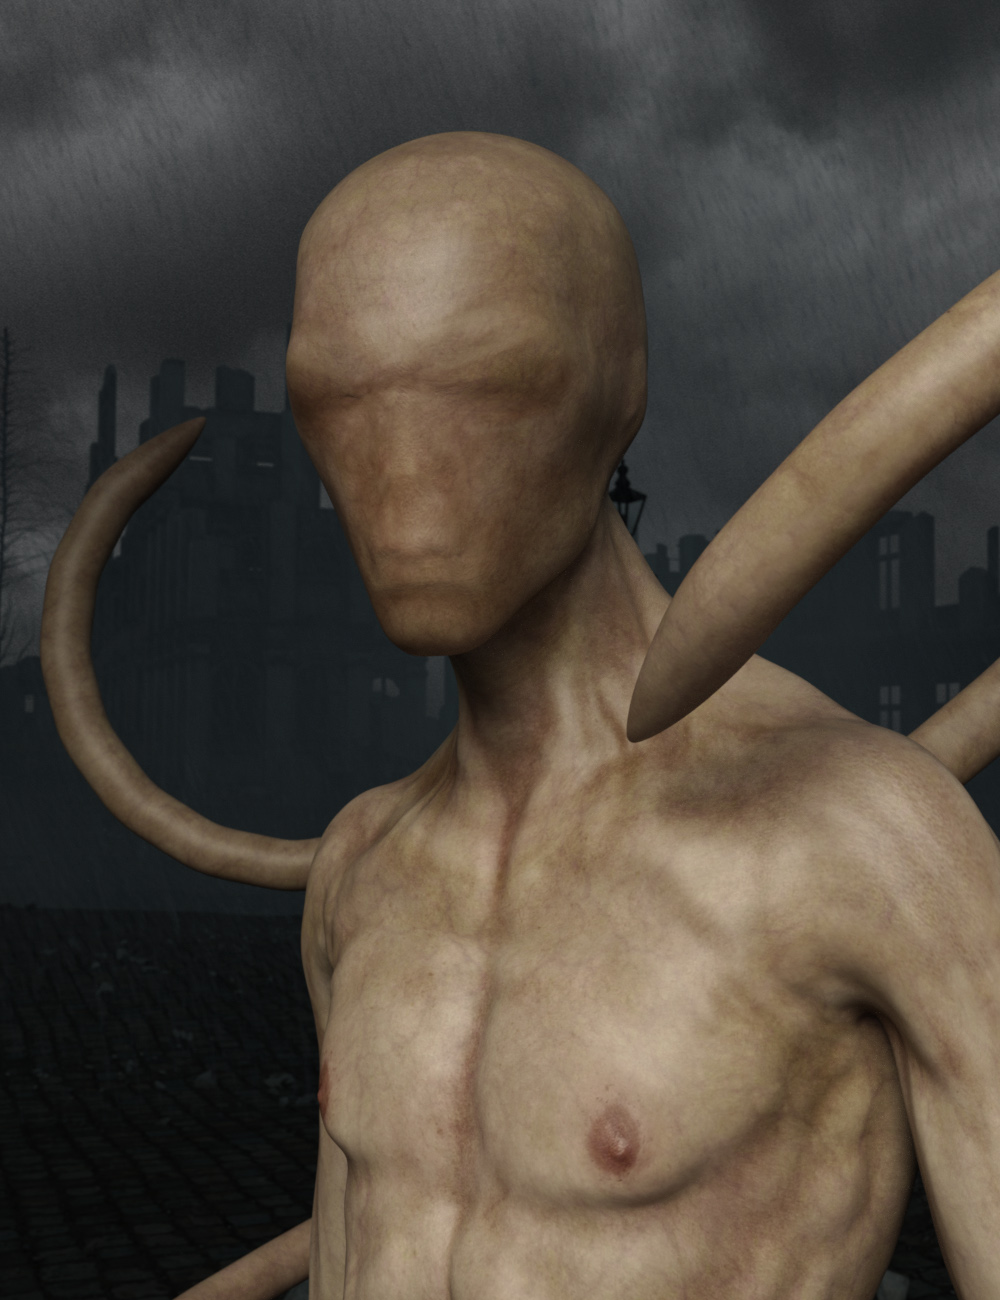 The Slim Man for Genesis 3 Male by: RawArt, 3D Models by Daz 3D